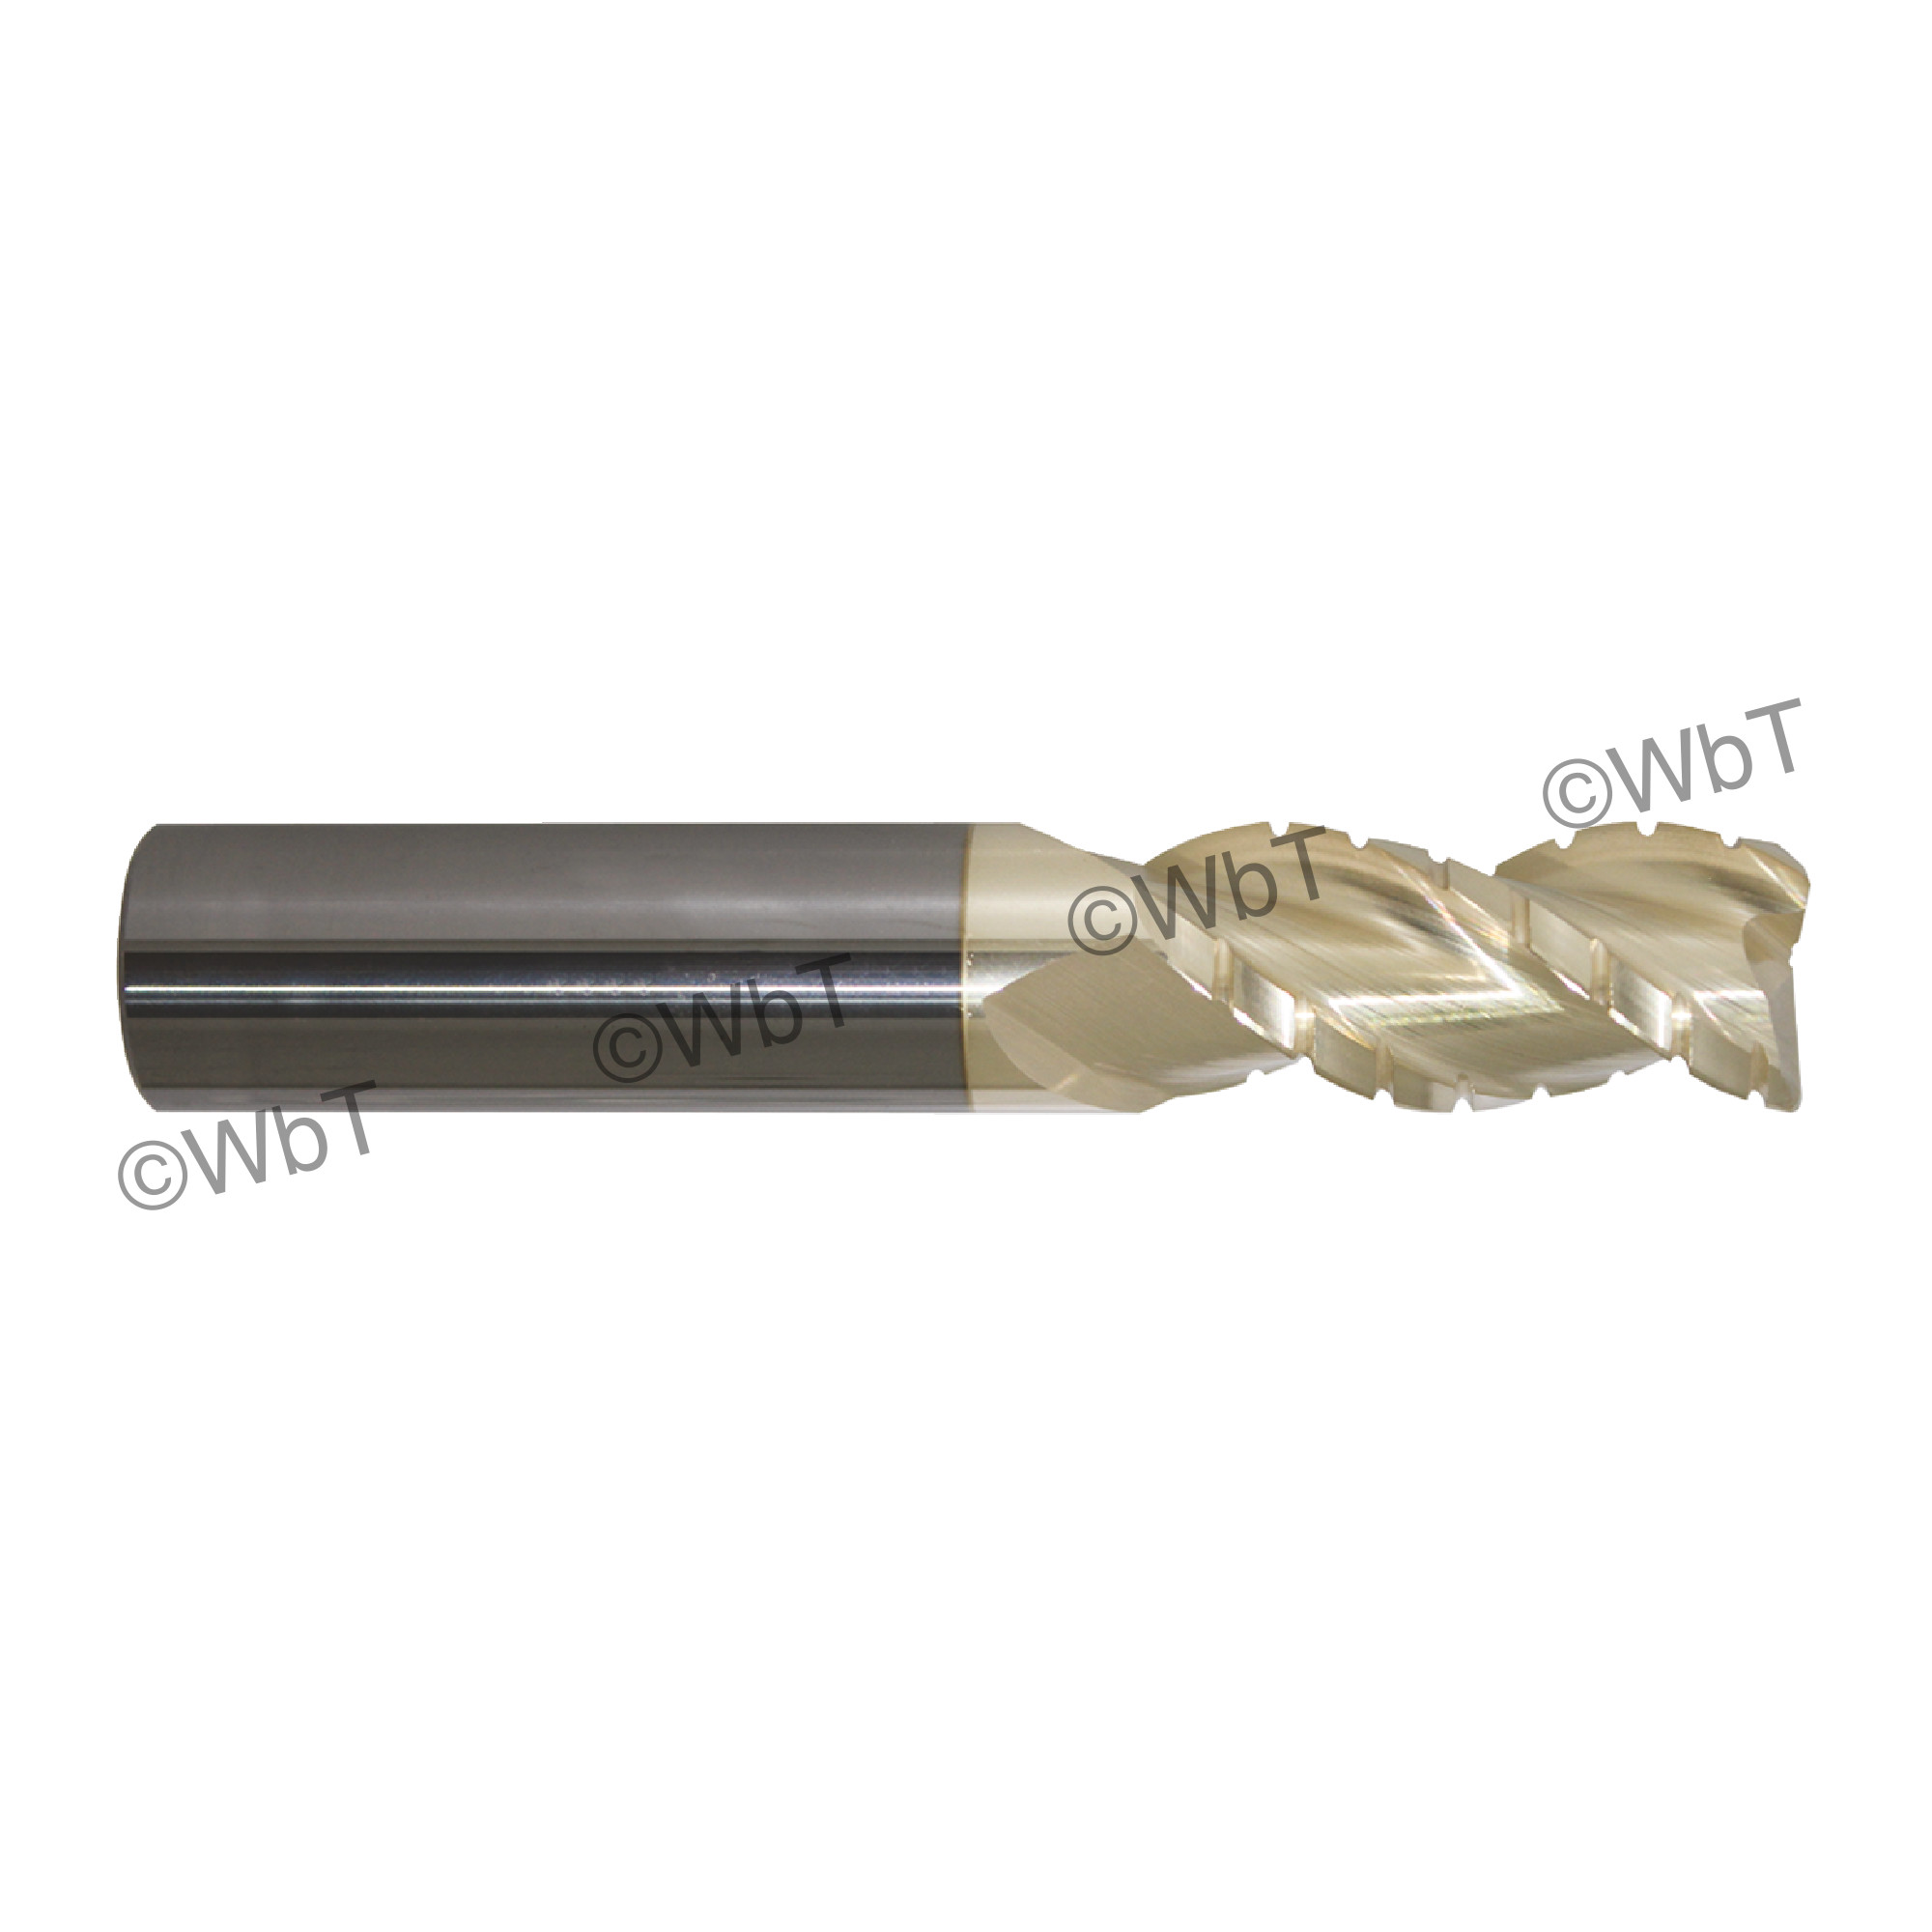 Promax Solid Carbide 3 Flute Roughing-Finishing Corner Radius End Mill 1/8" 119-00816 Series 119